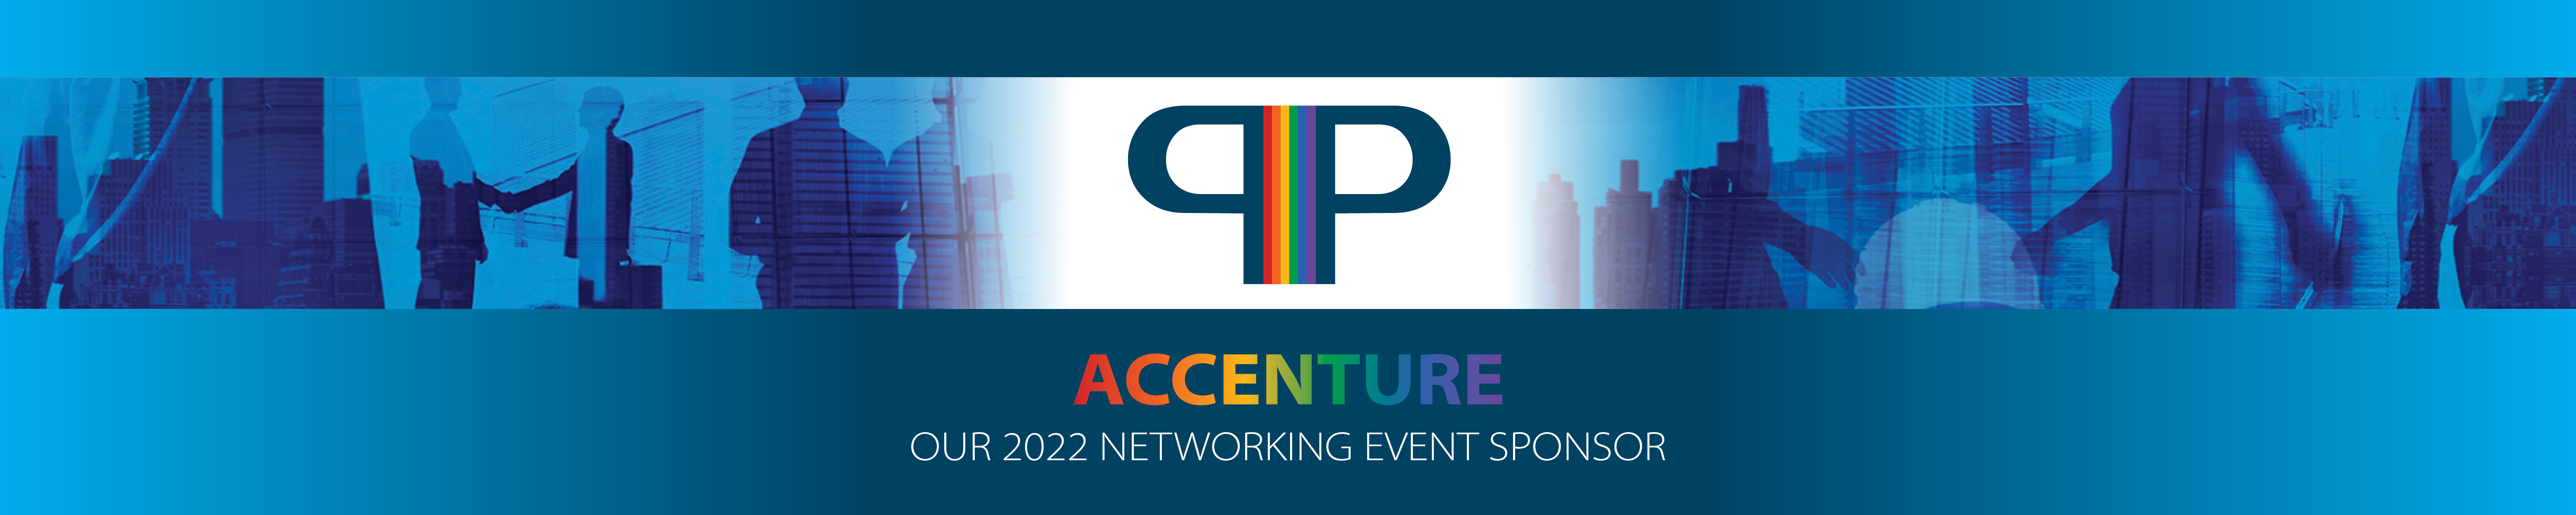 PIP_Conference_Sponsor_Accenture